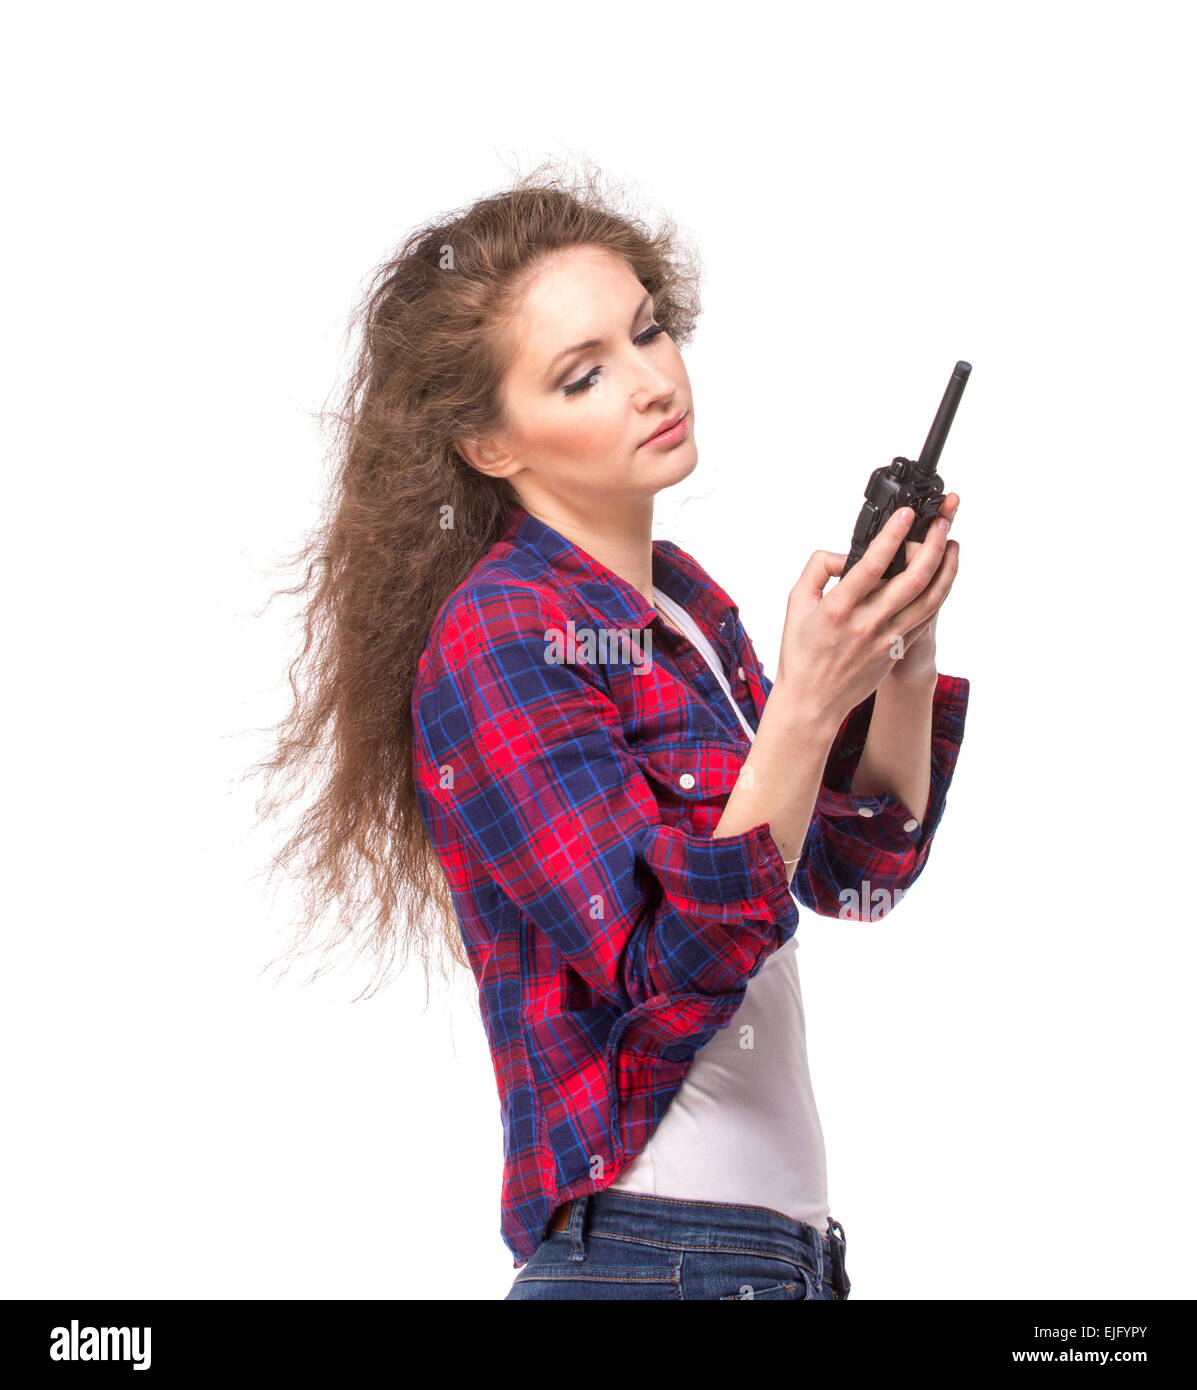 Woman with cb radio, isolated Stock Photo